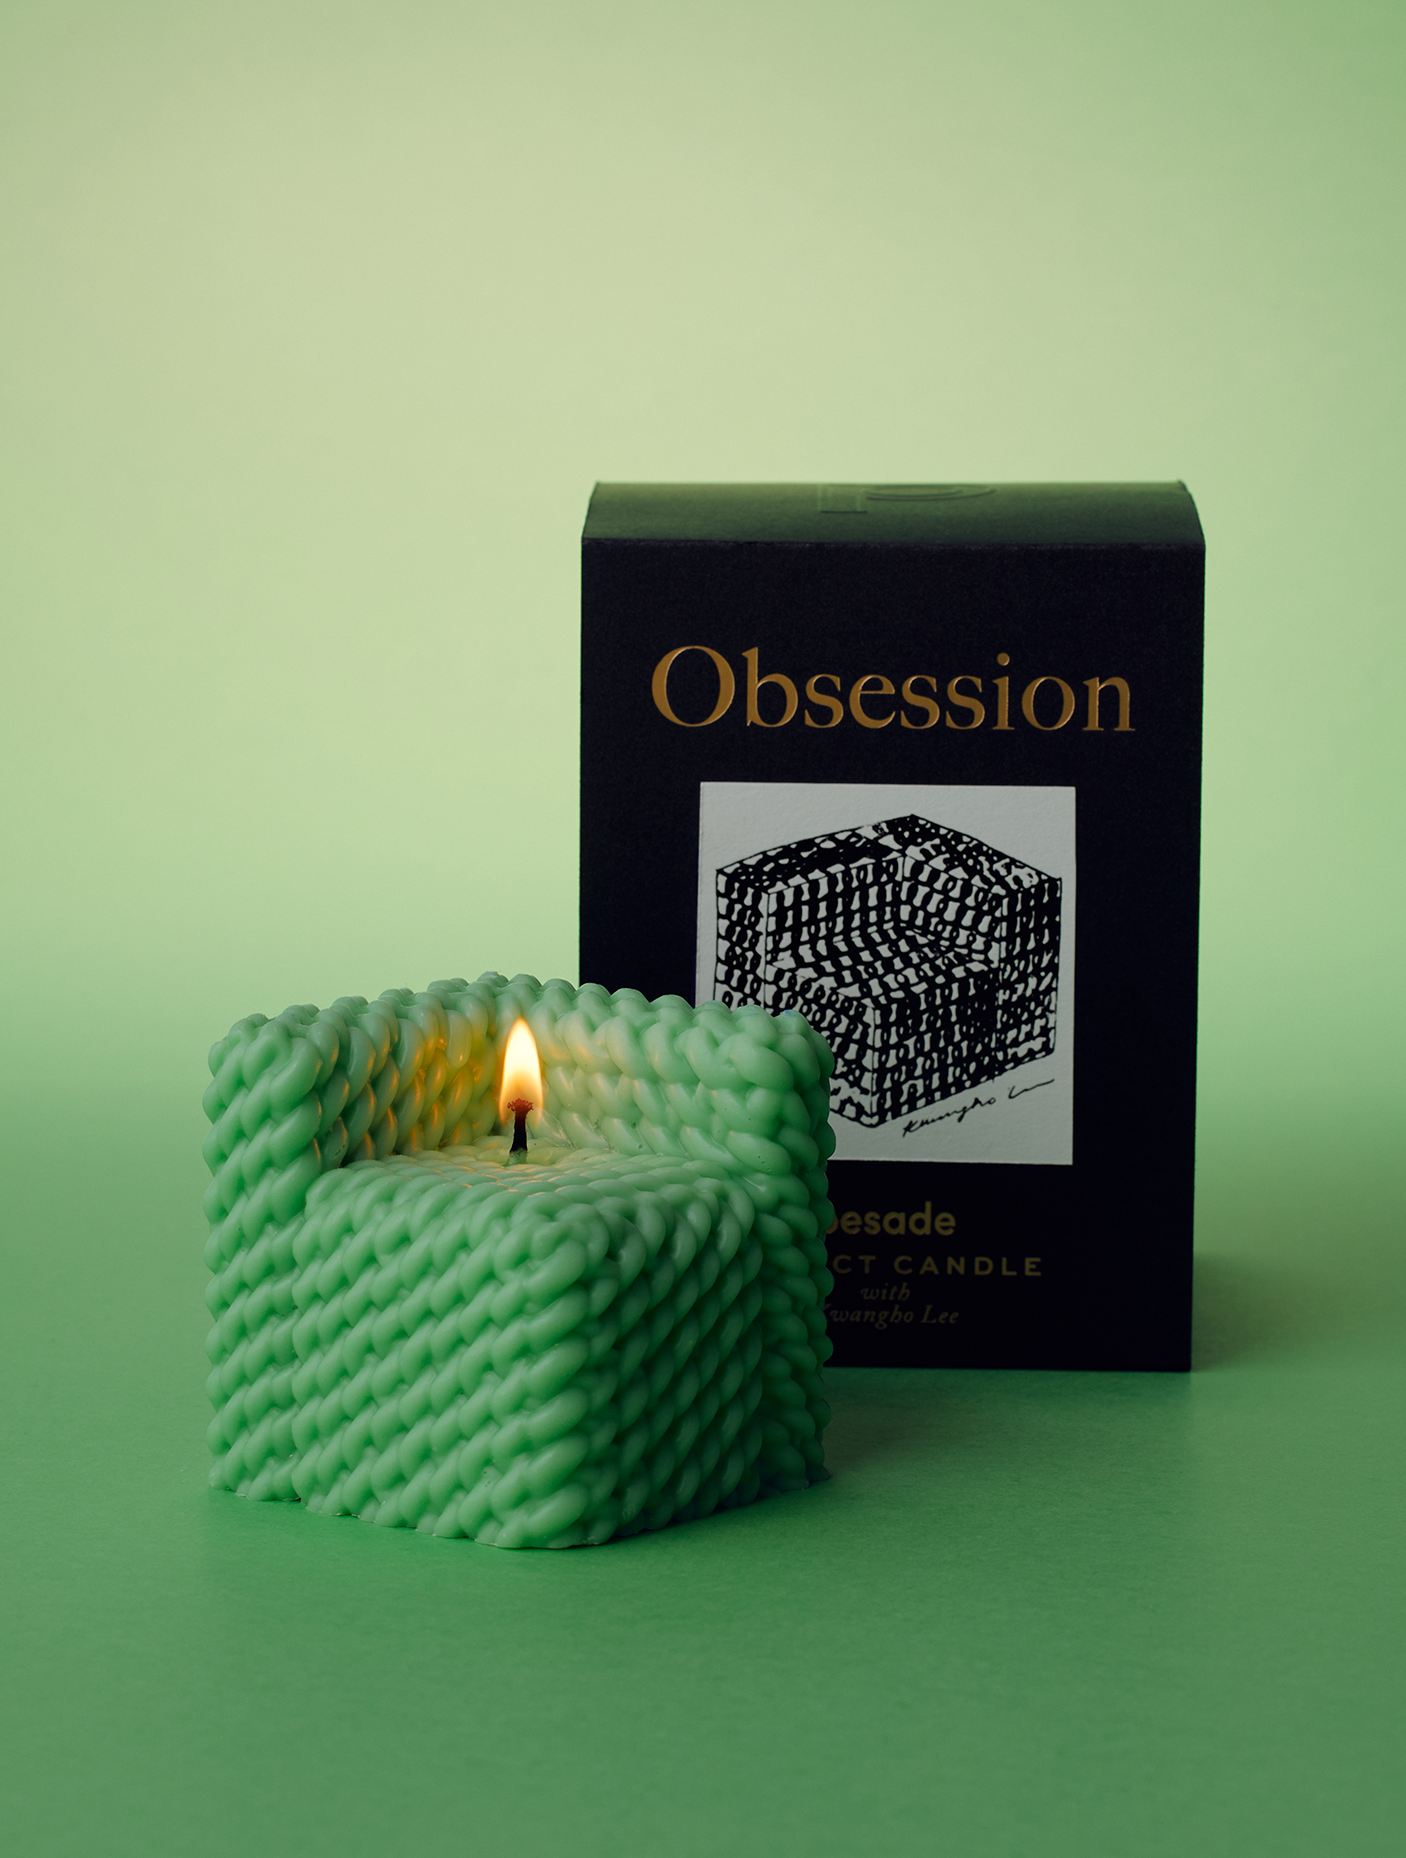 Pesade | Obsession object candle - Green